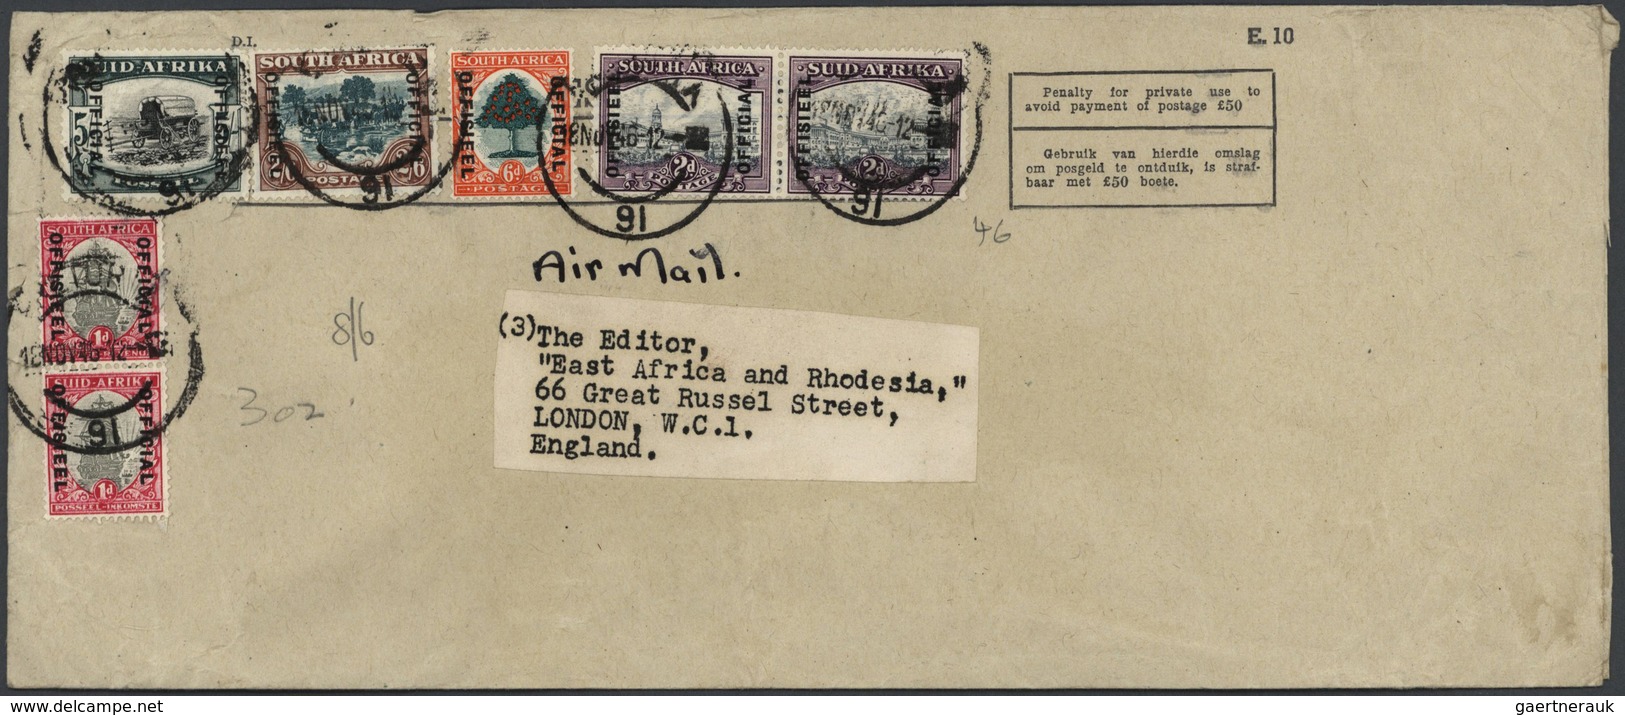 Südafrika - Dienstmarken: 1941/47, Covers (7 Inc. 4 By Air Mail) All Used To The Editor, "East Afric - Oficiales